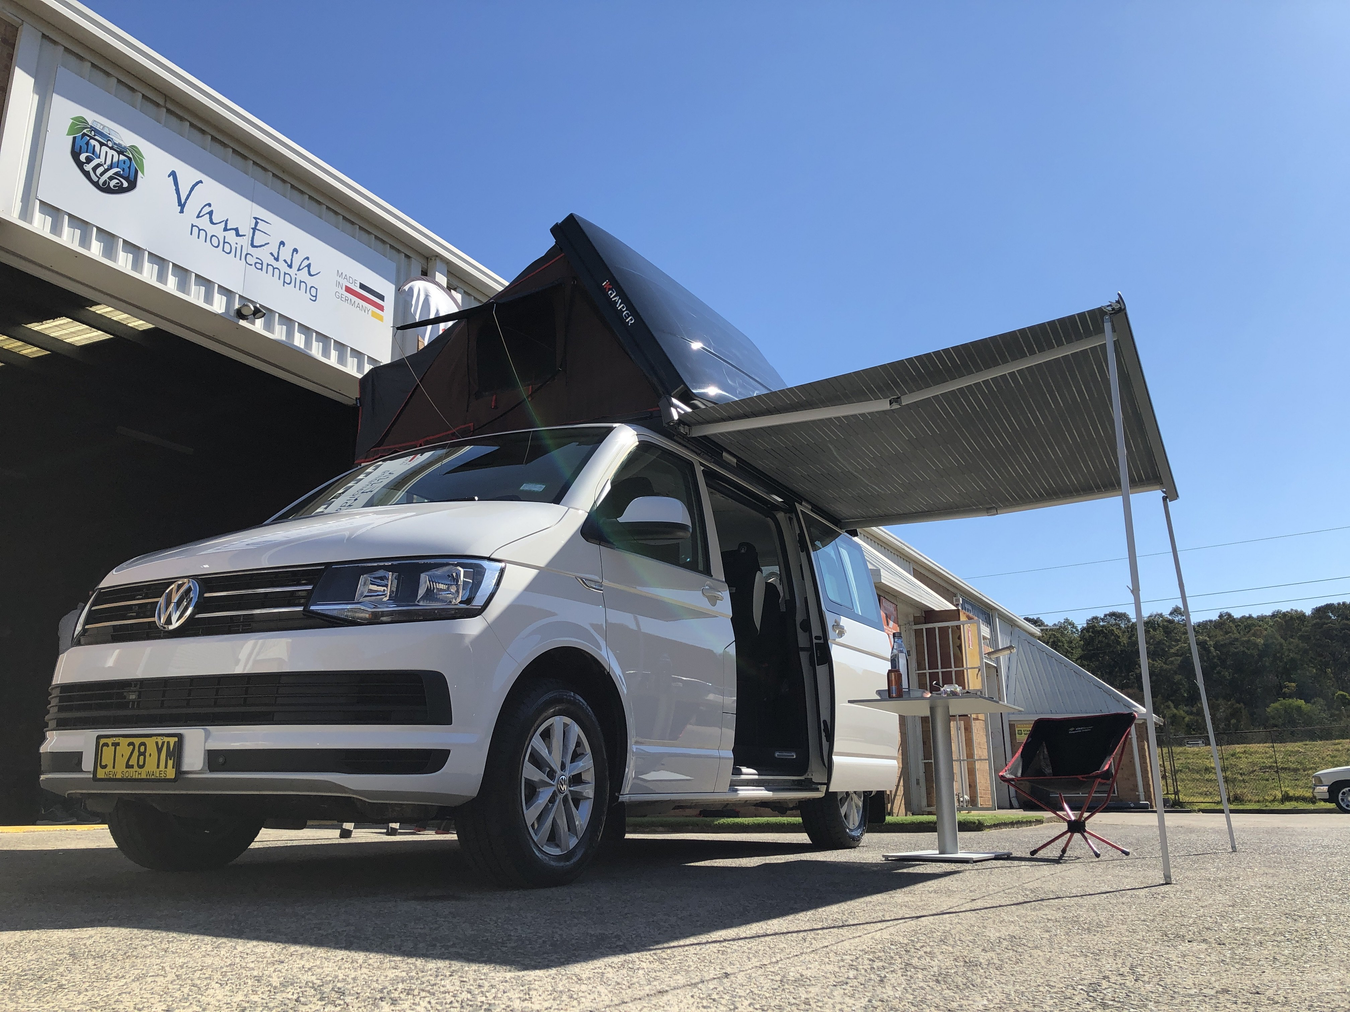 DOMETIC Awnings, Tents, Fridges, Outdoor, Electrical